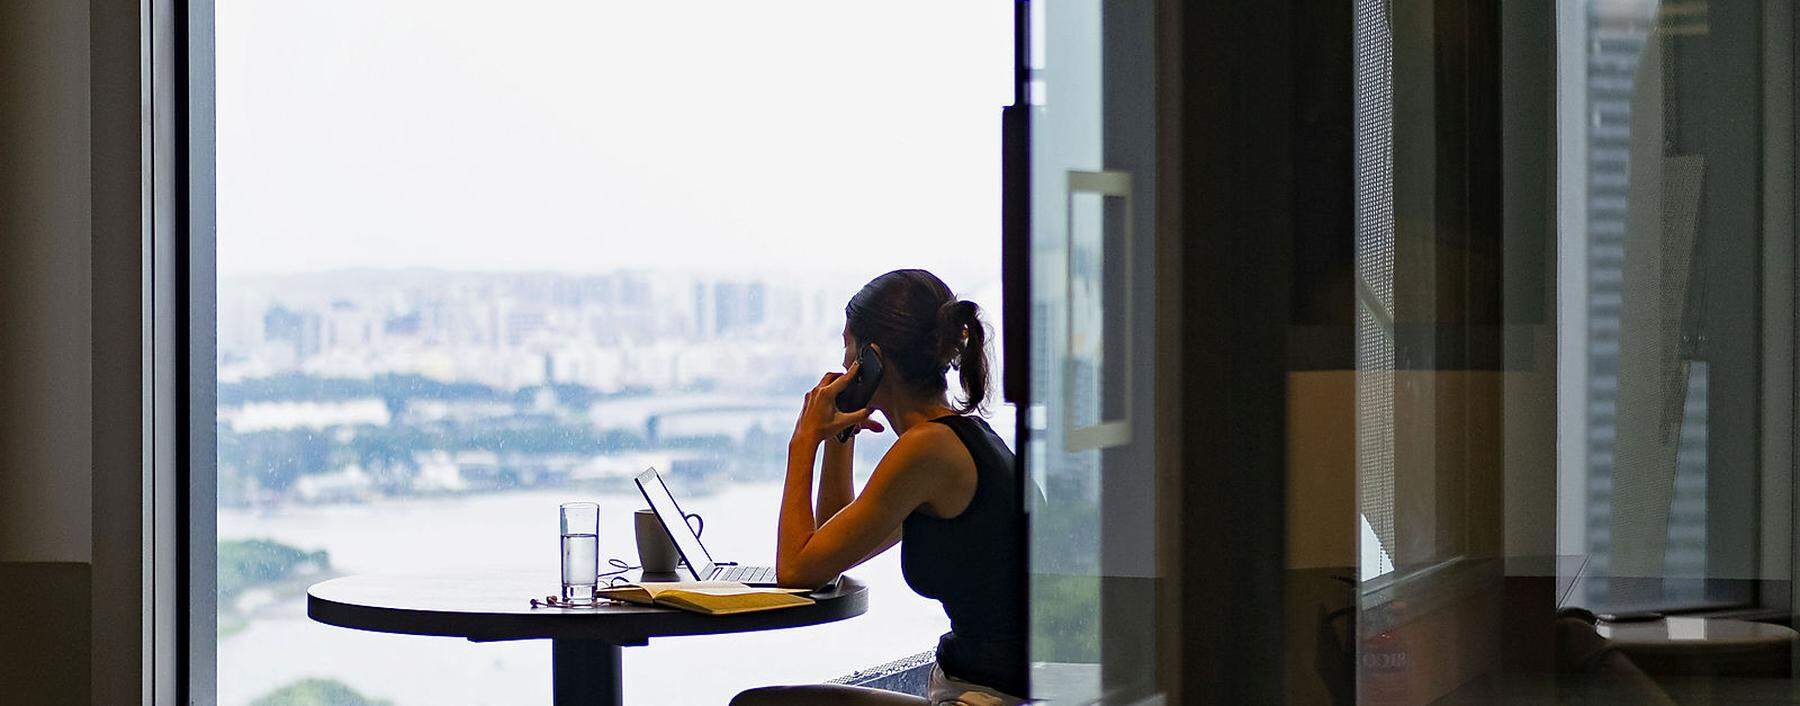 A woman answers a call while looking out the window in co-working space The Great Room´s Centennial Tower location in Singapore